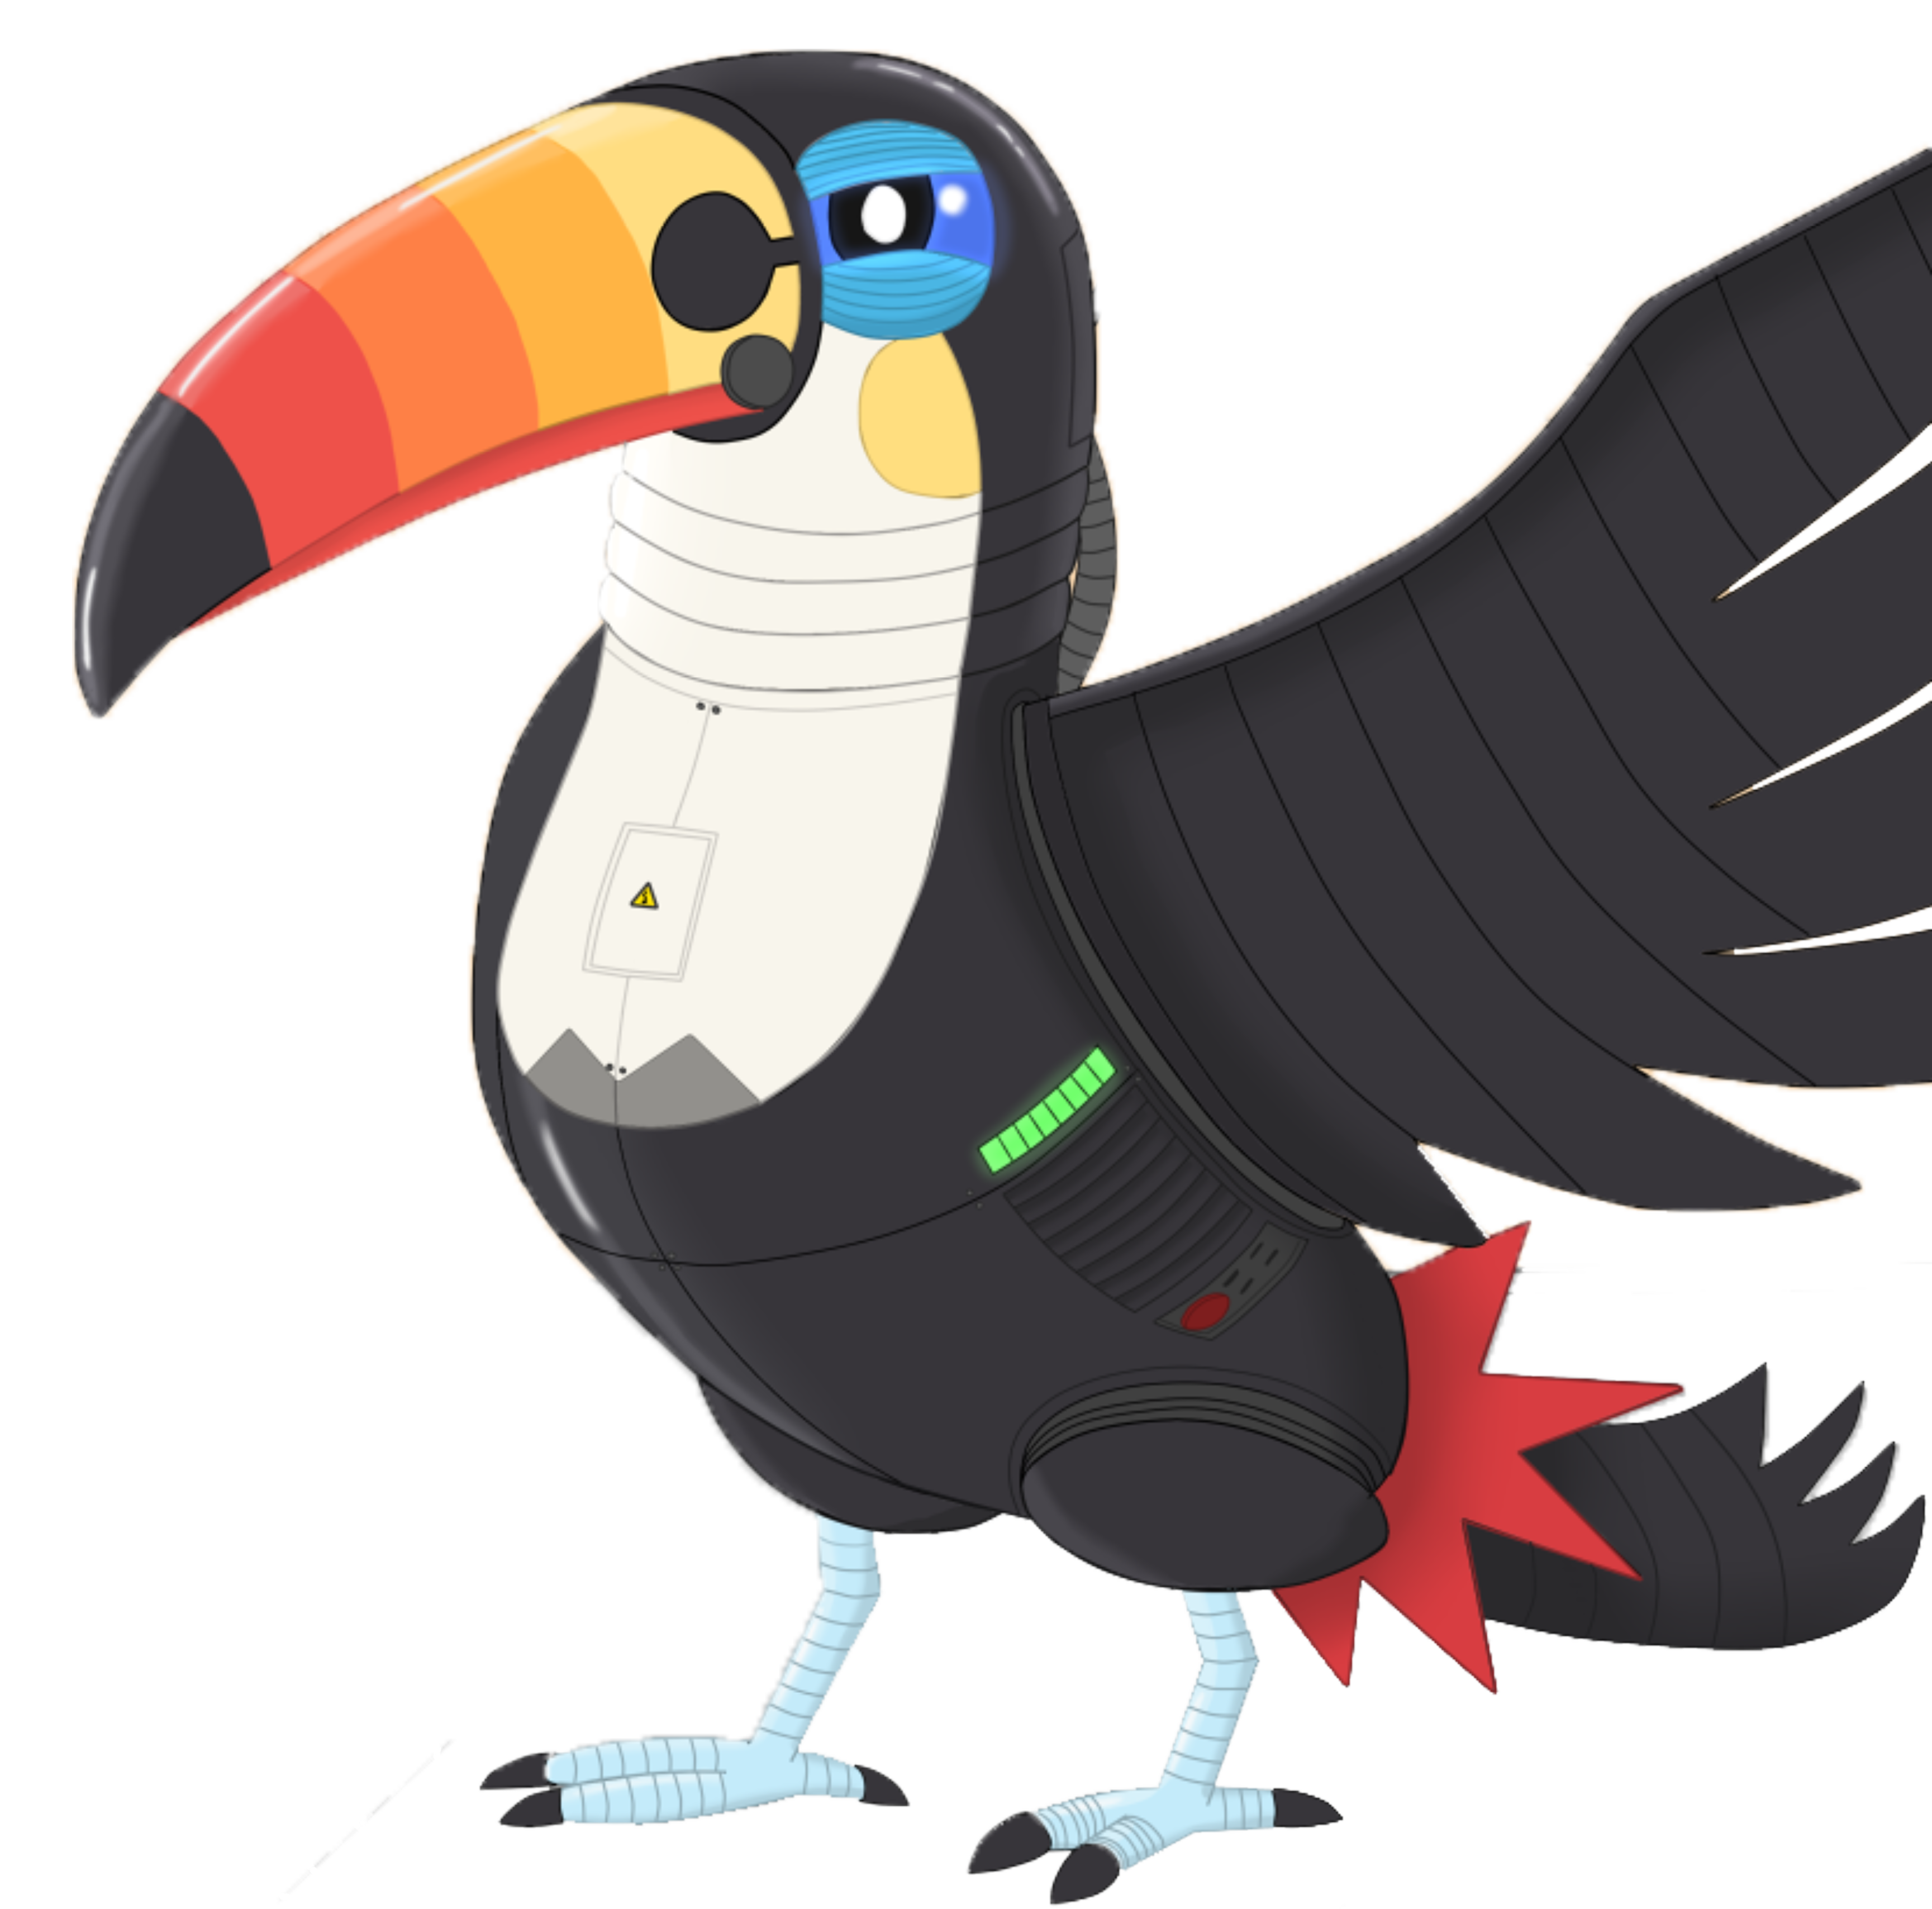 image of the RoboToucan